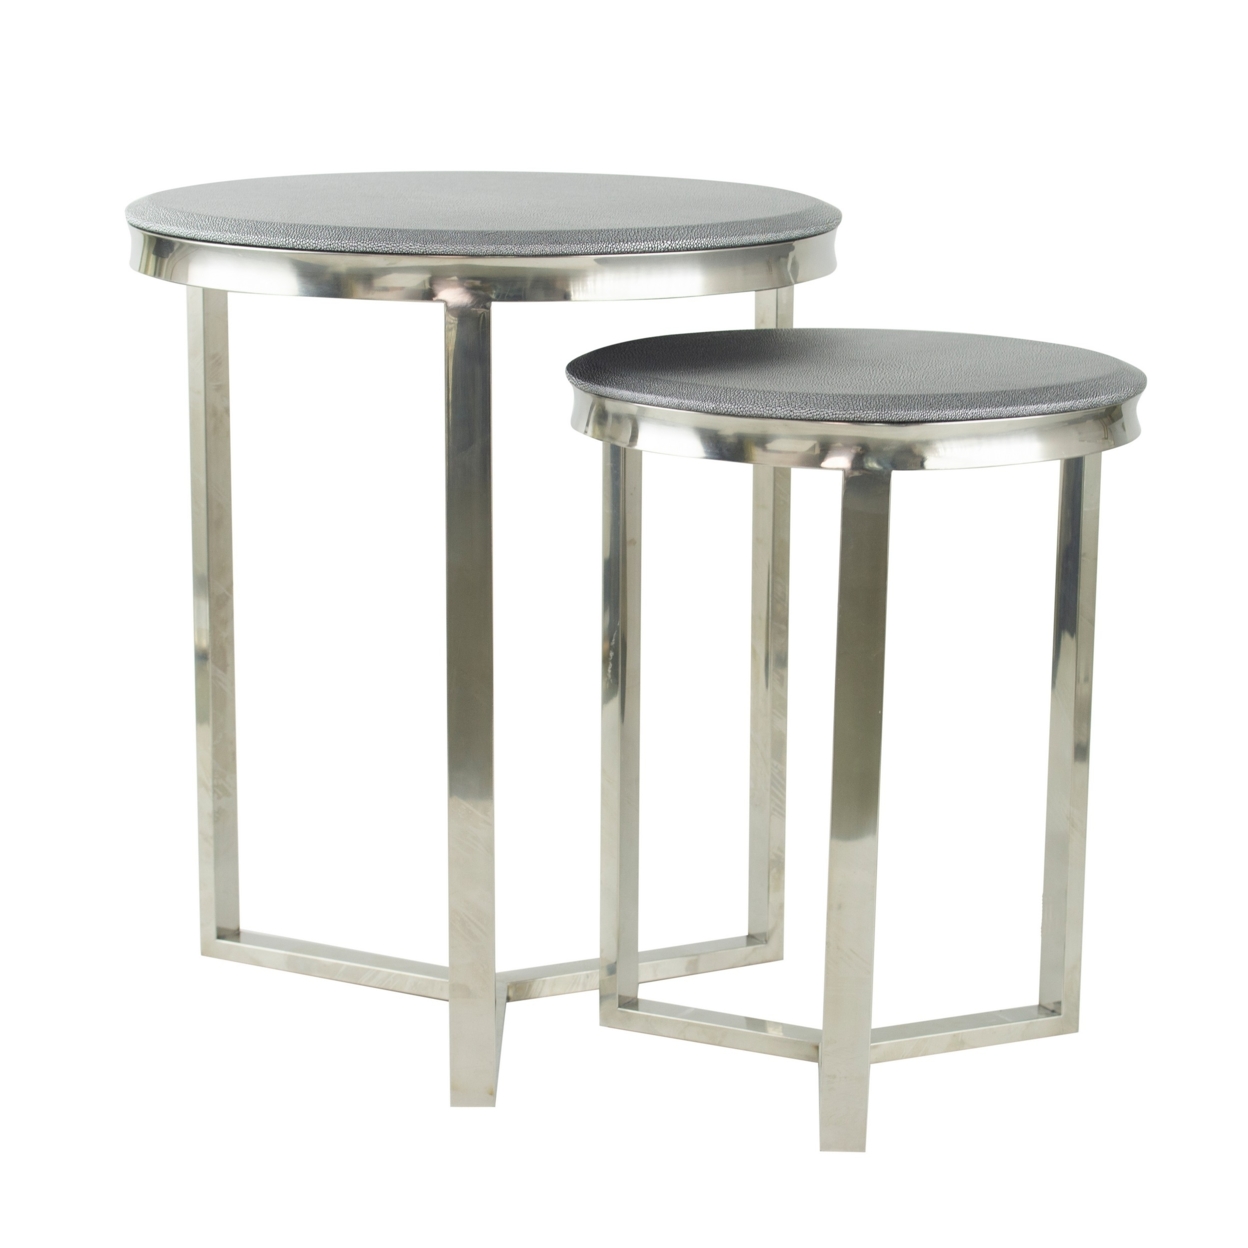 23, 19 Inch Round Nesting Accent Table, Faux Leather Top, Set Of 2, Silver- Saltoro Sherpi